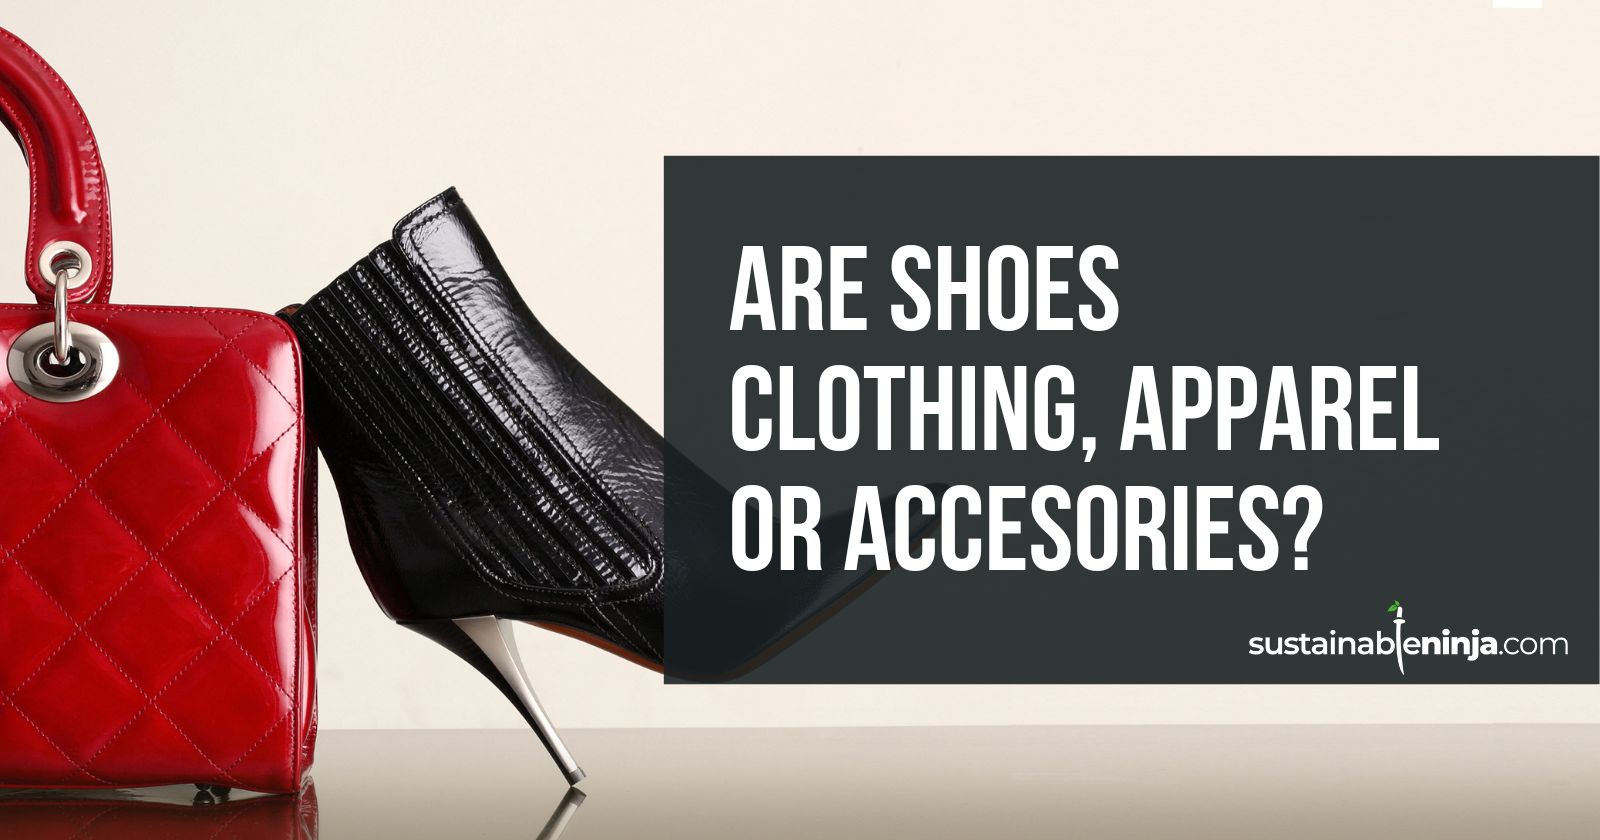 Are Shoes Clothing, Apparel, or Fashion Accessories?